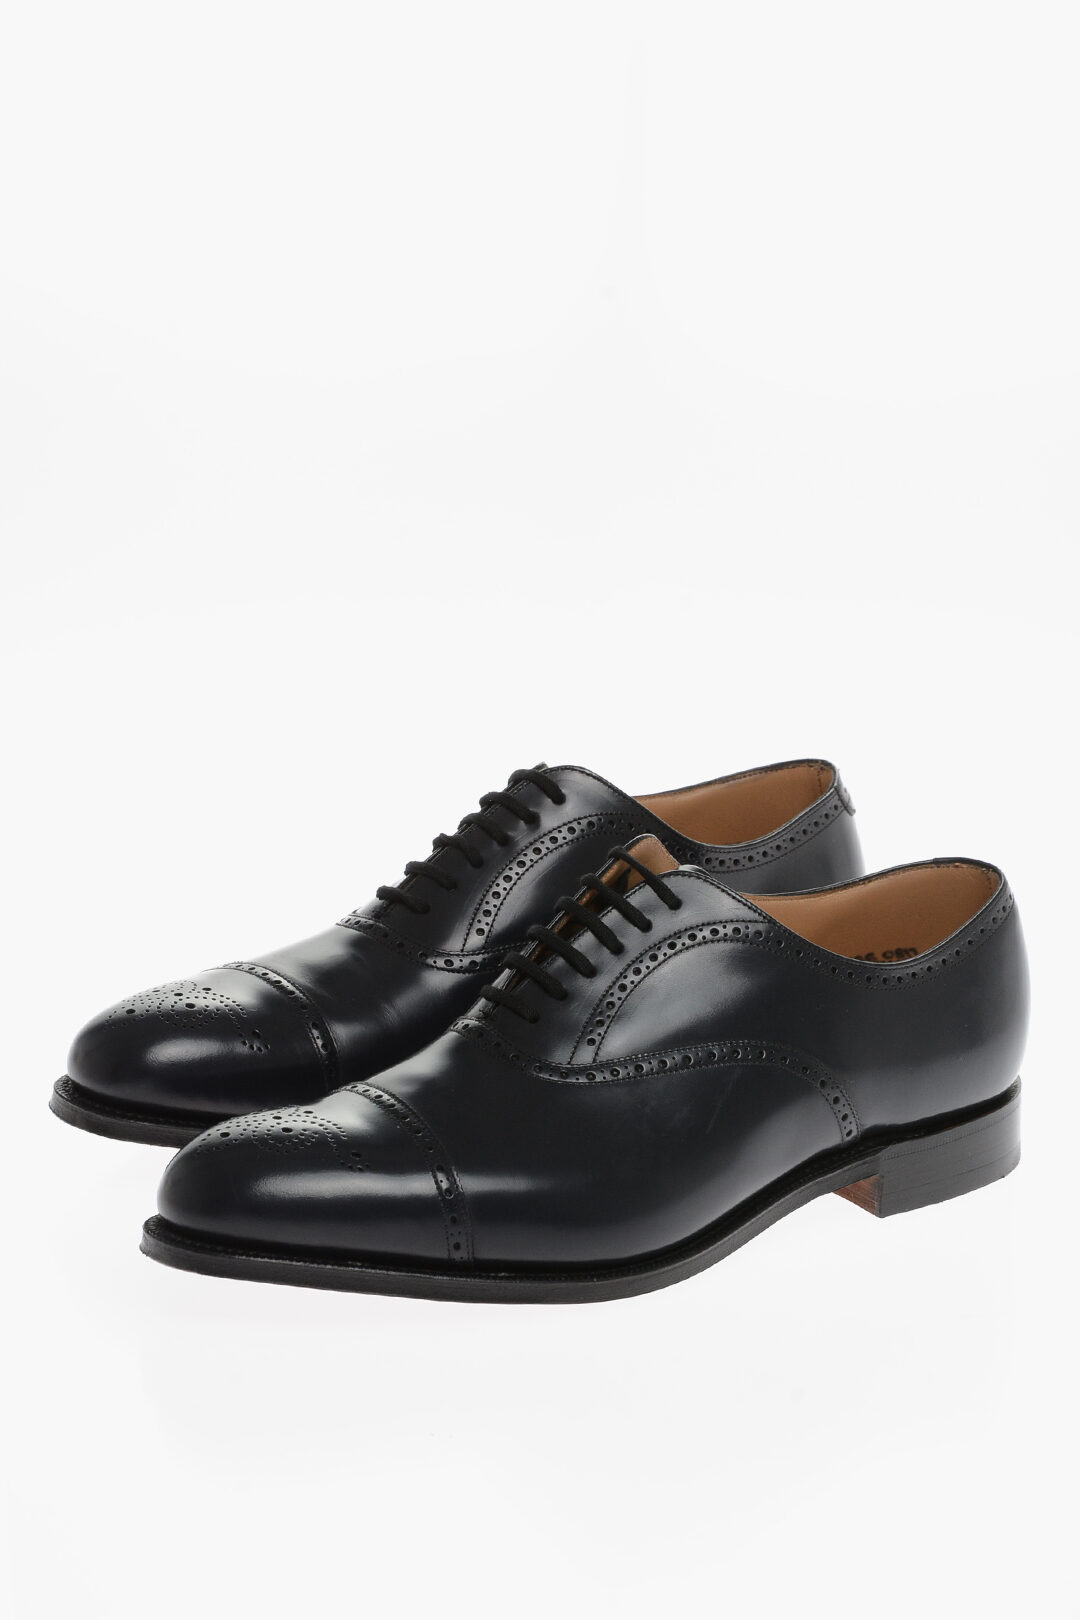 ZEGNA Torino Leather Oxford Shoes for Men